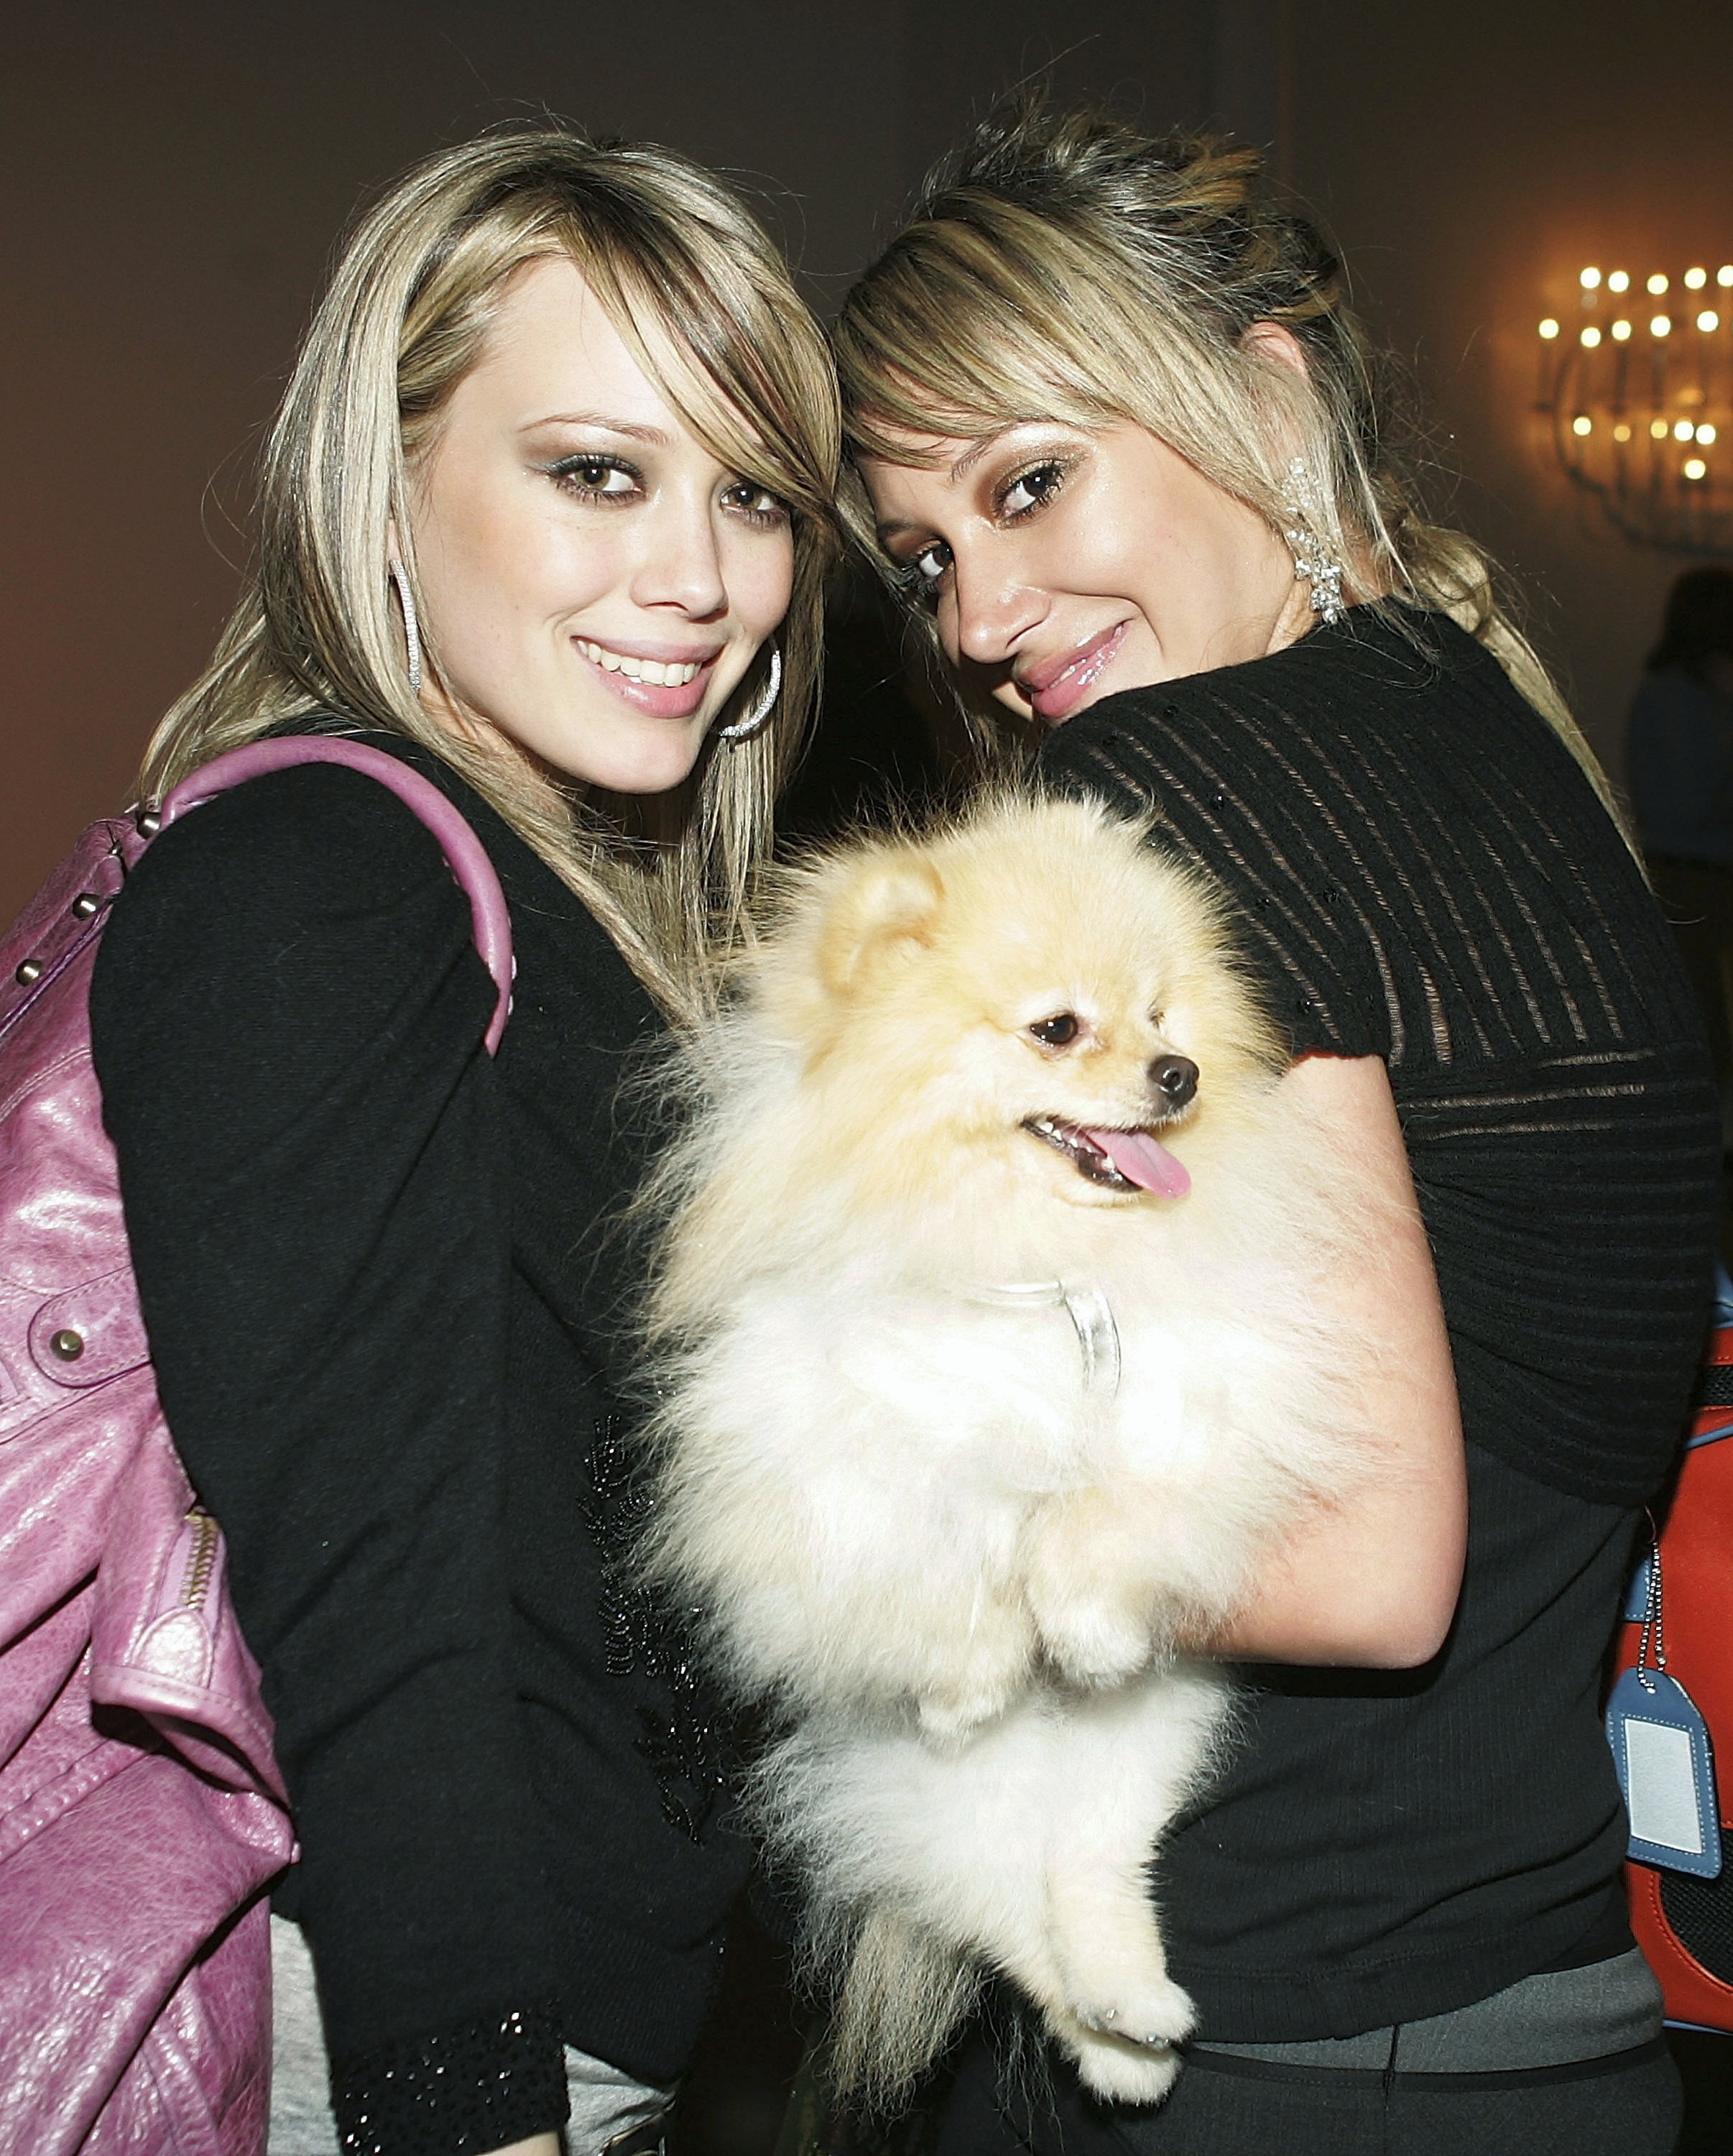 Hilary Duff with another woman carrying her Pomeranian